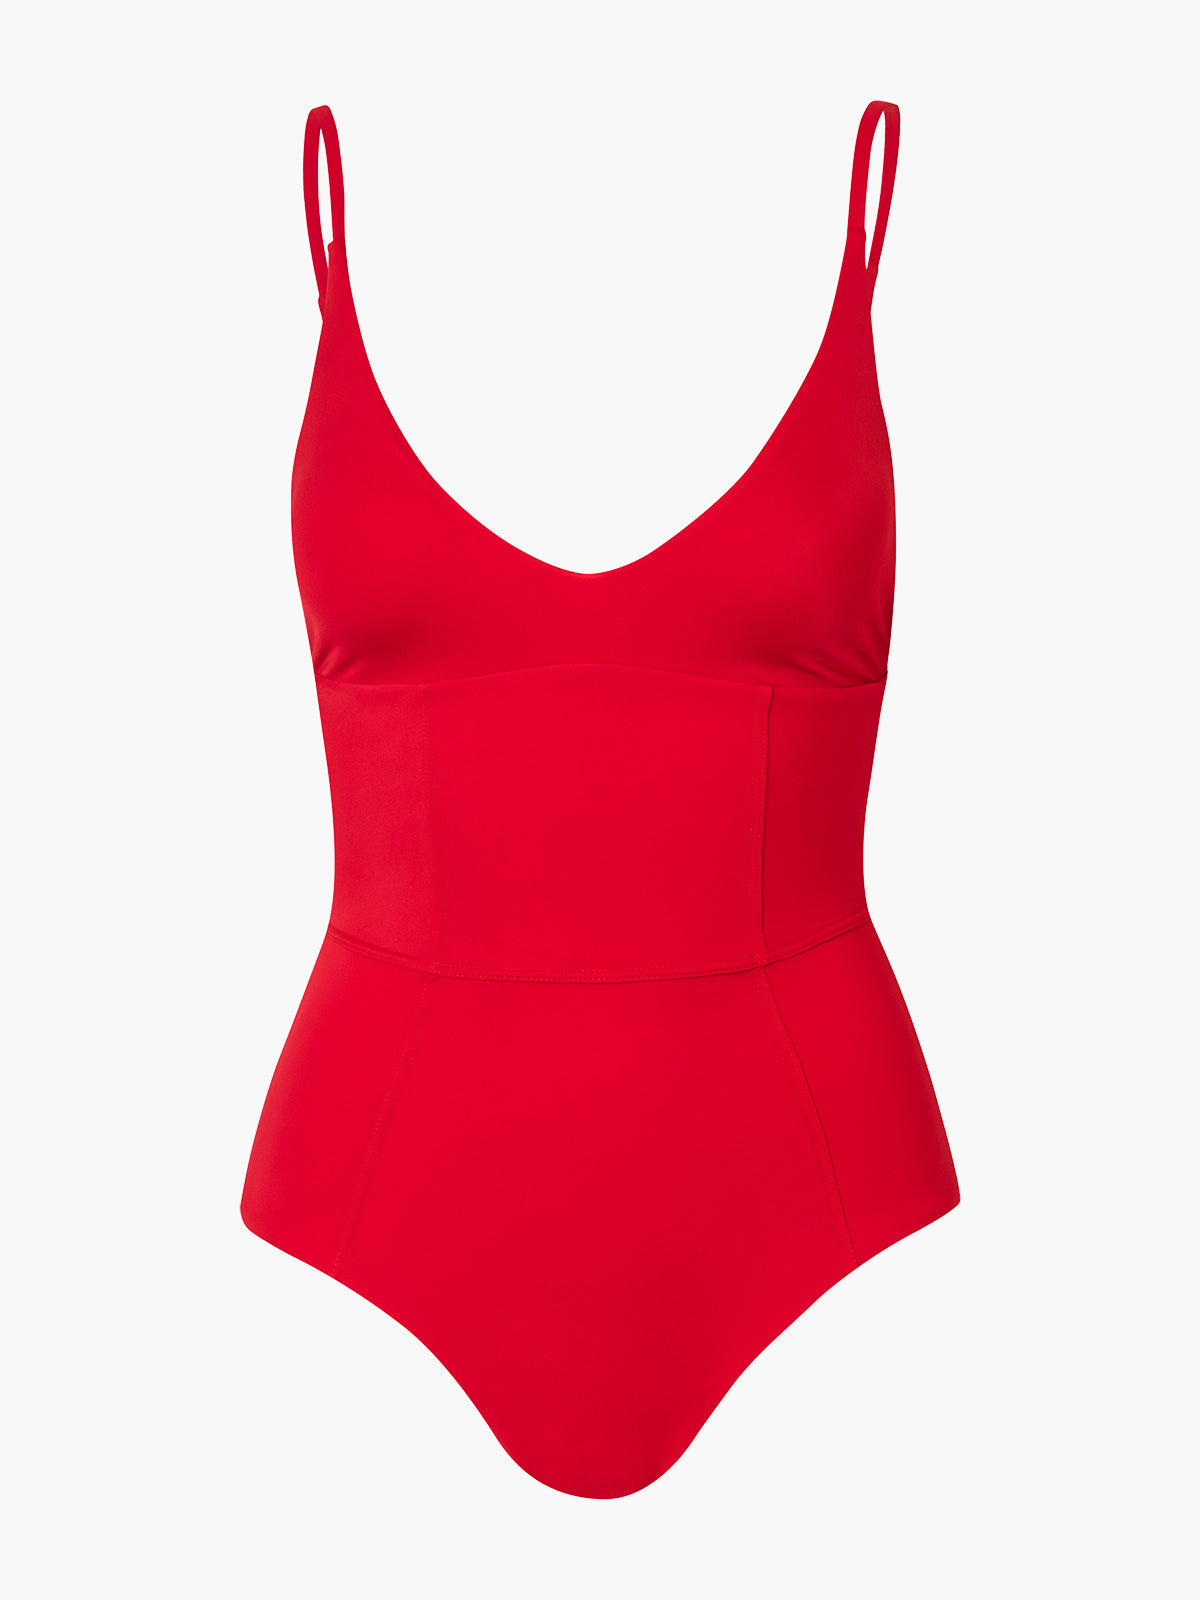 Juvenal Maillot | Cherry Red